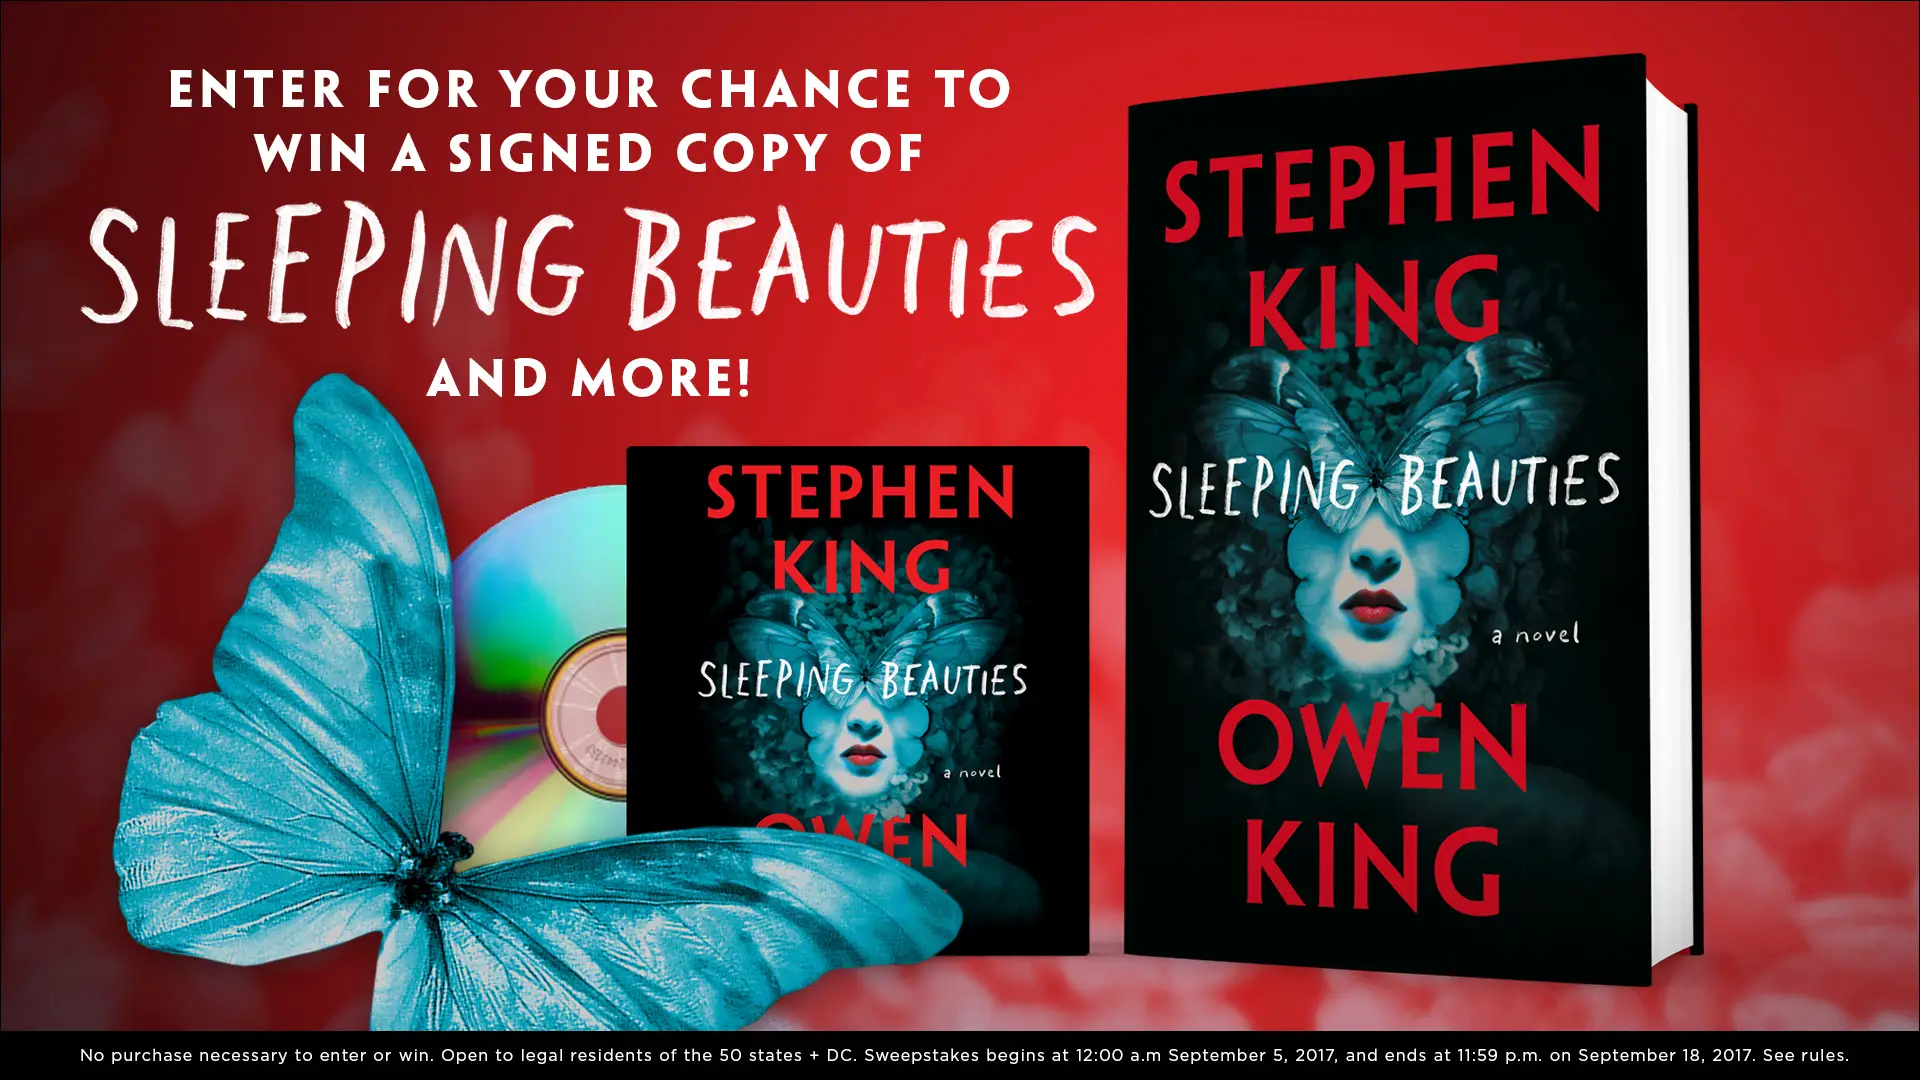 11 Winners! Win a copy of Stephen's King's new book, Sleeping Beauties the day it is released.